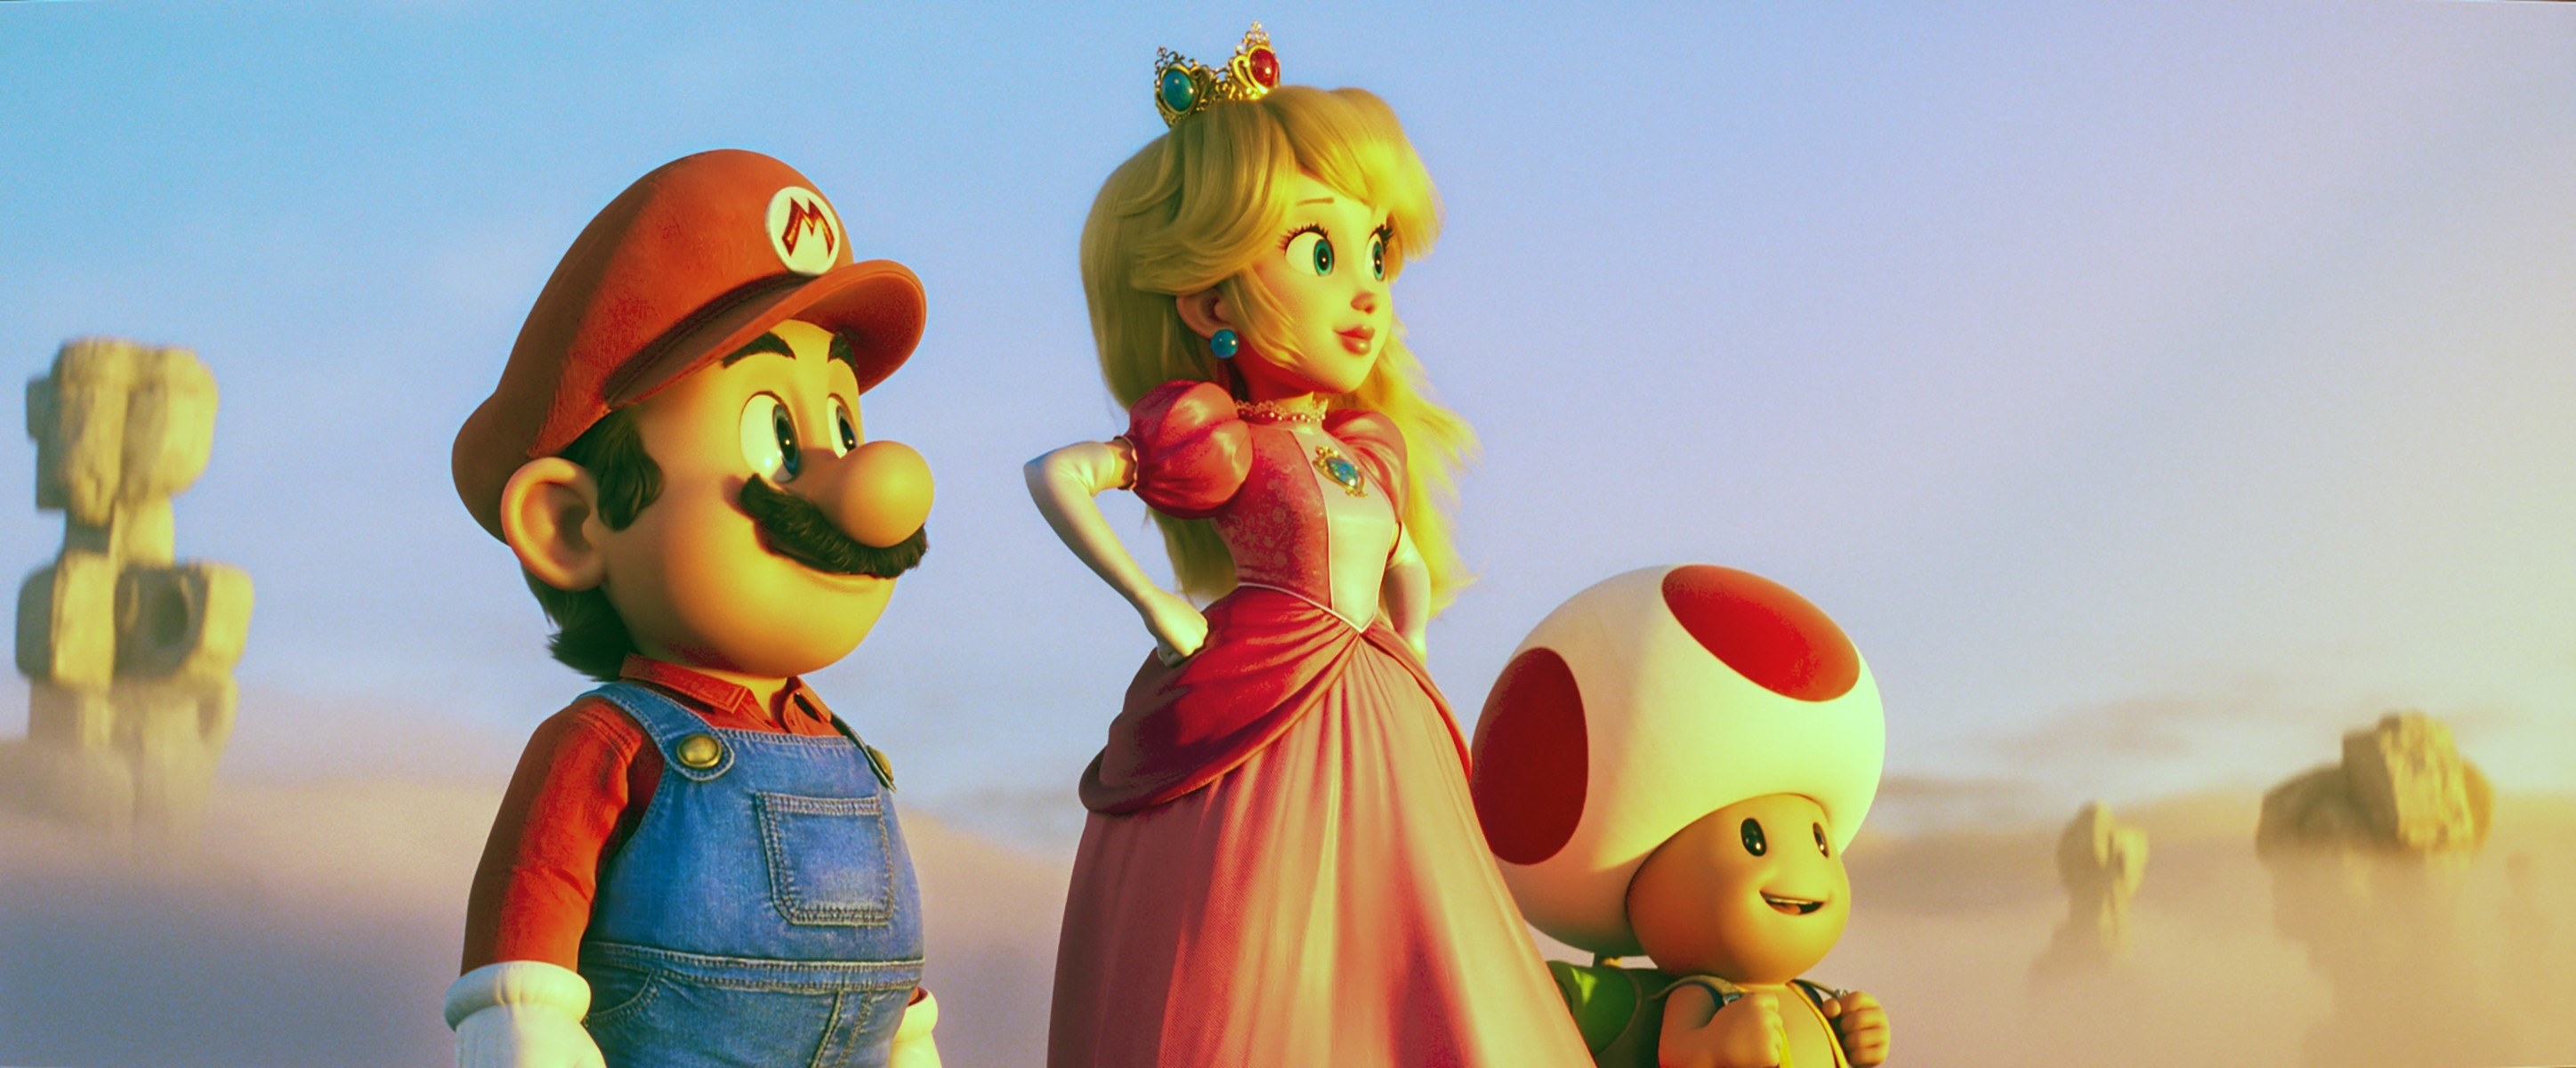 Mario, Peach, and Toad look off into the distance